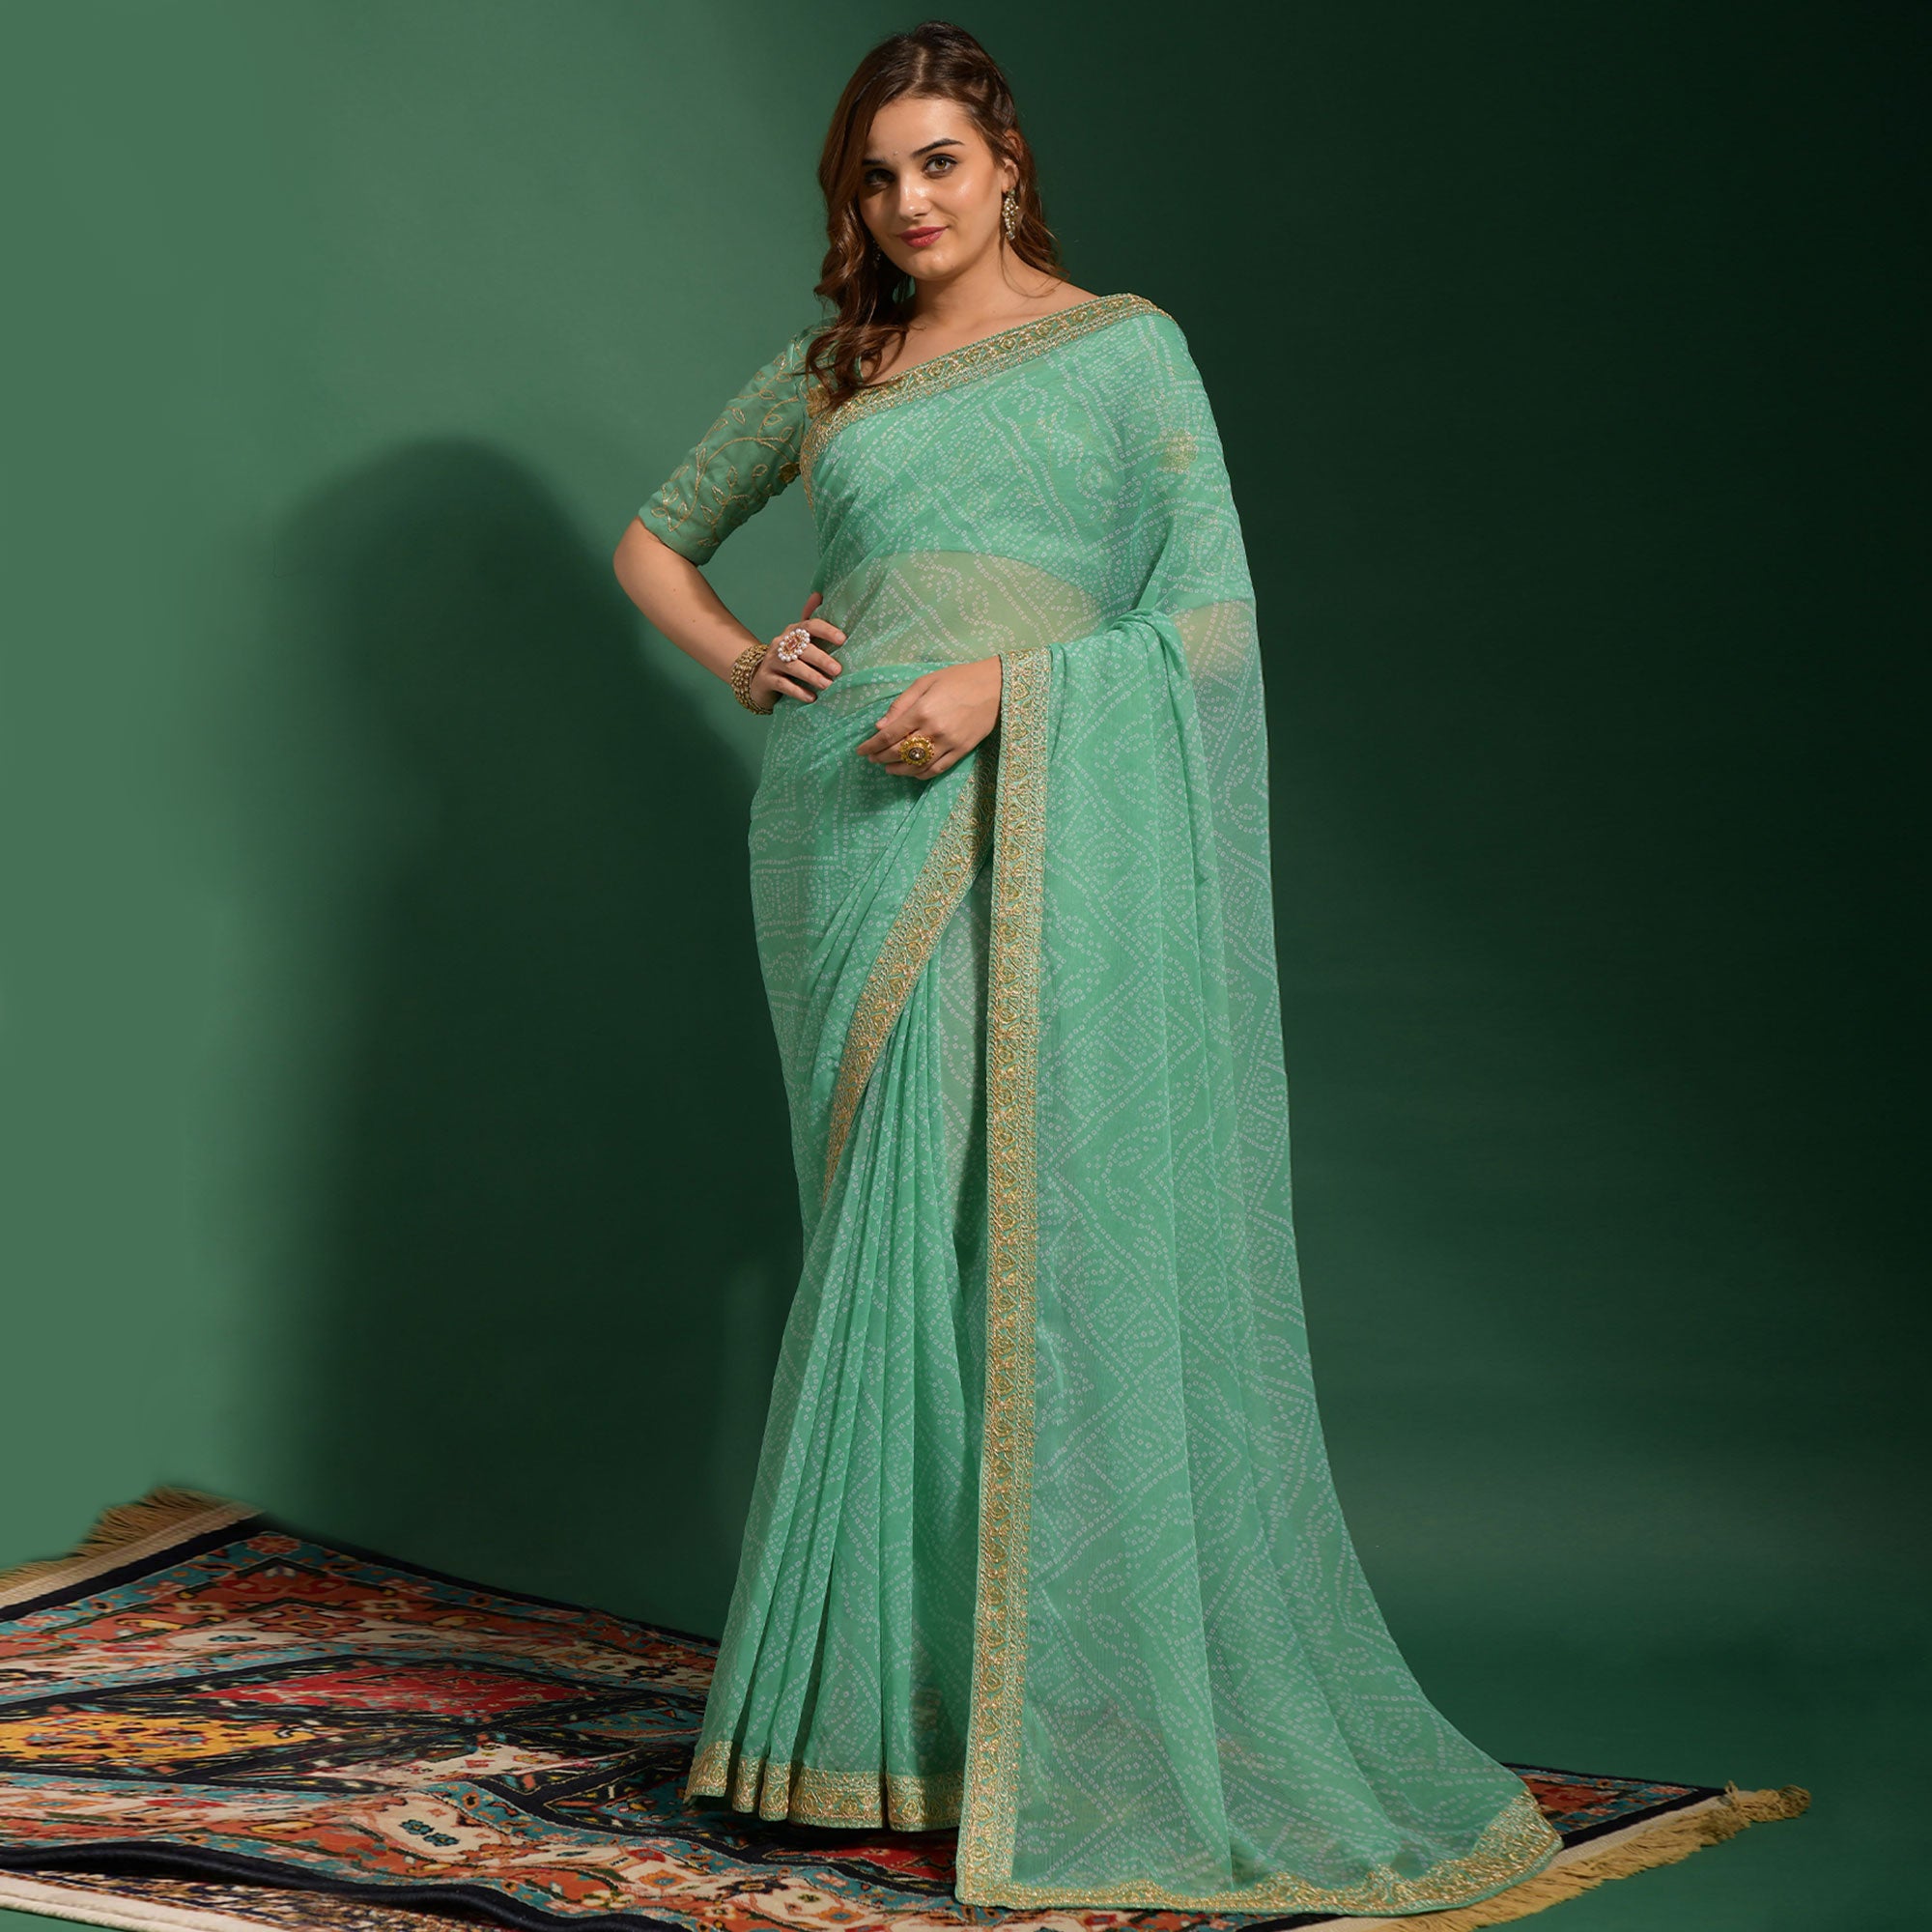 Sea Green Bandhani Printed Georgette Saree With Embroidered Border